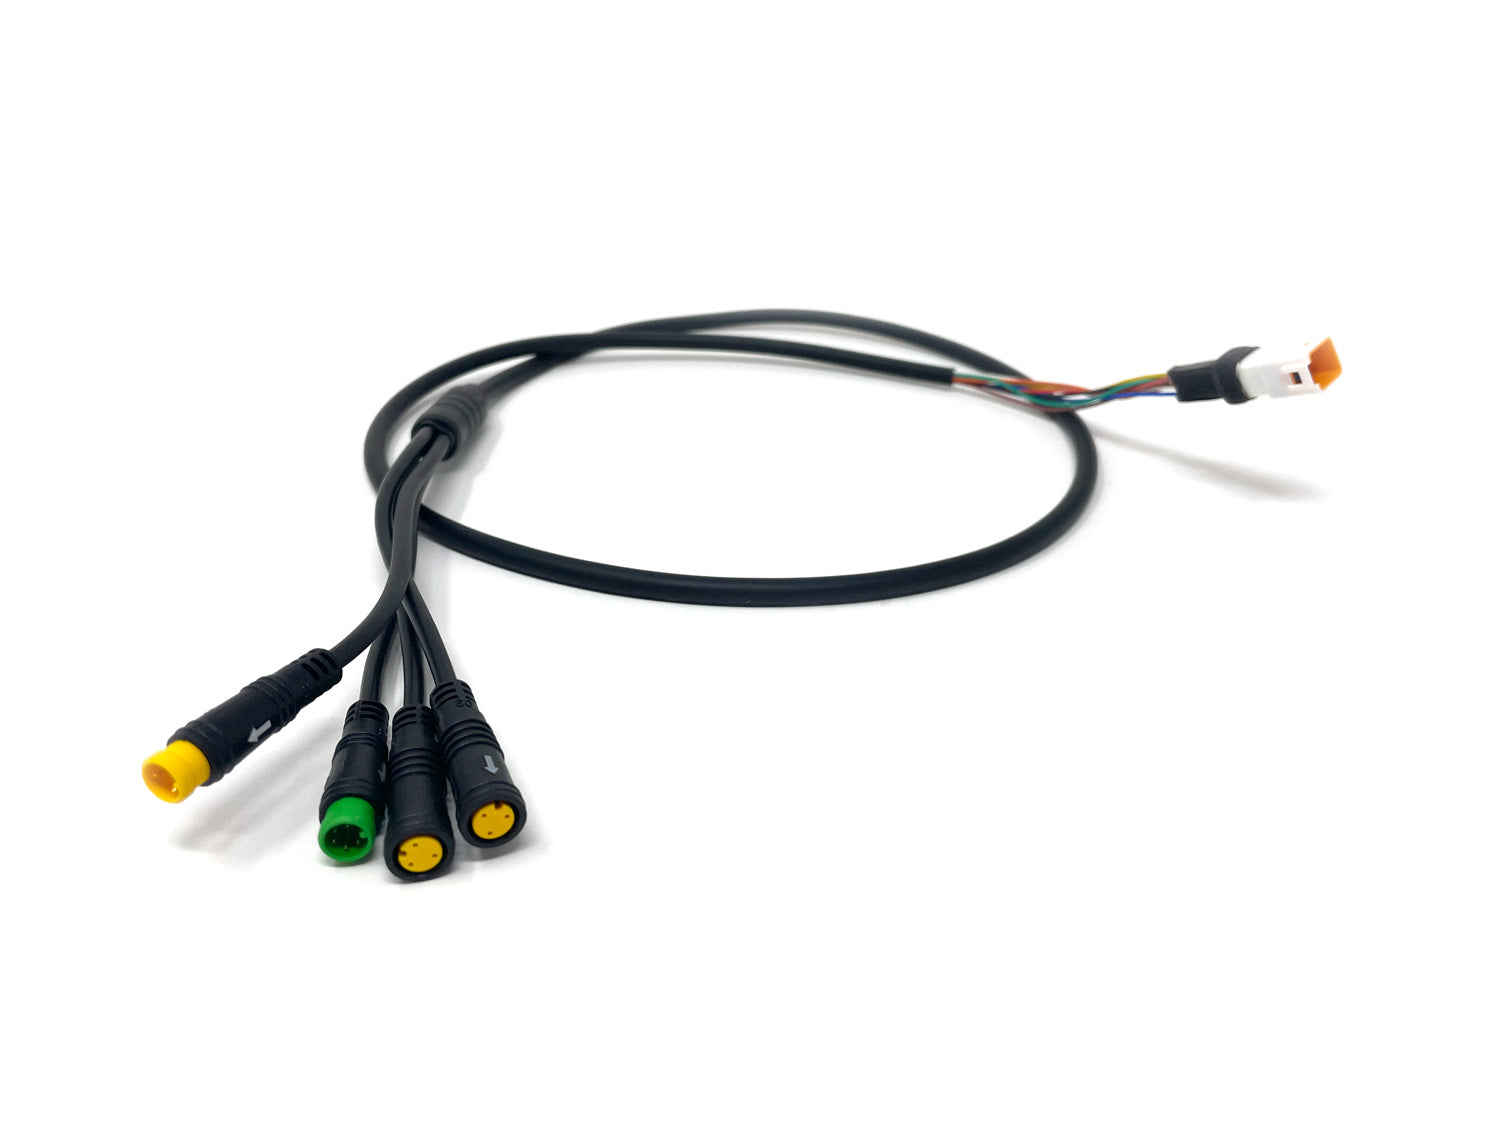 4y Main Communication Cable for Bafang Ultra Motor